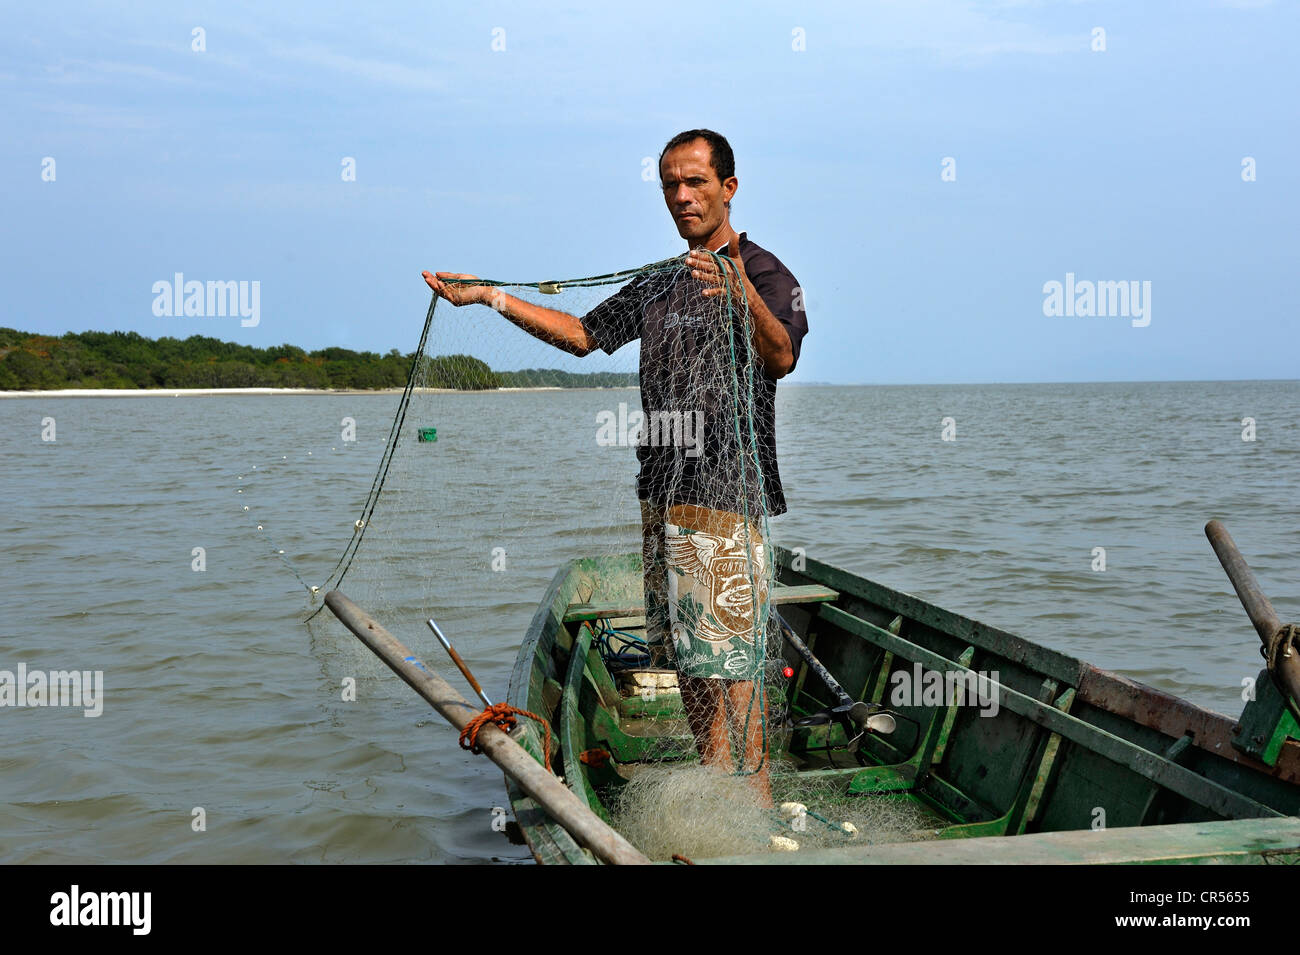 Fisherman in a small boat with a net in Sepitiba Bay, since the construction of the TKCSA steel plant by Thyssen-Krupp, the Stock Photo